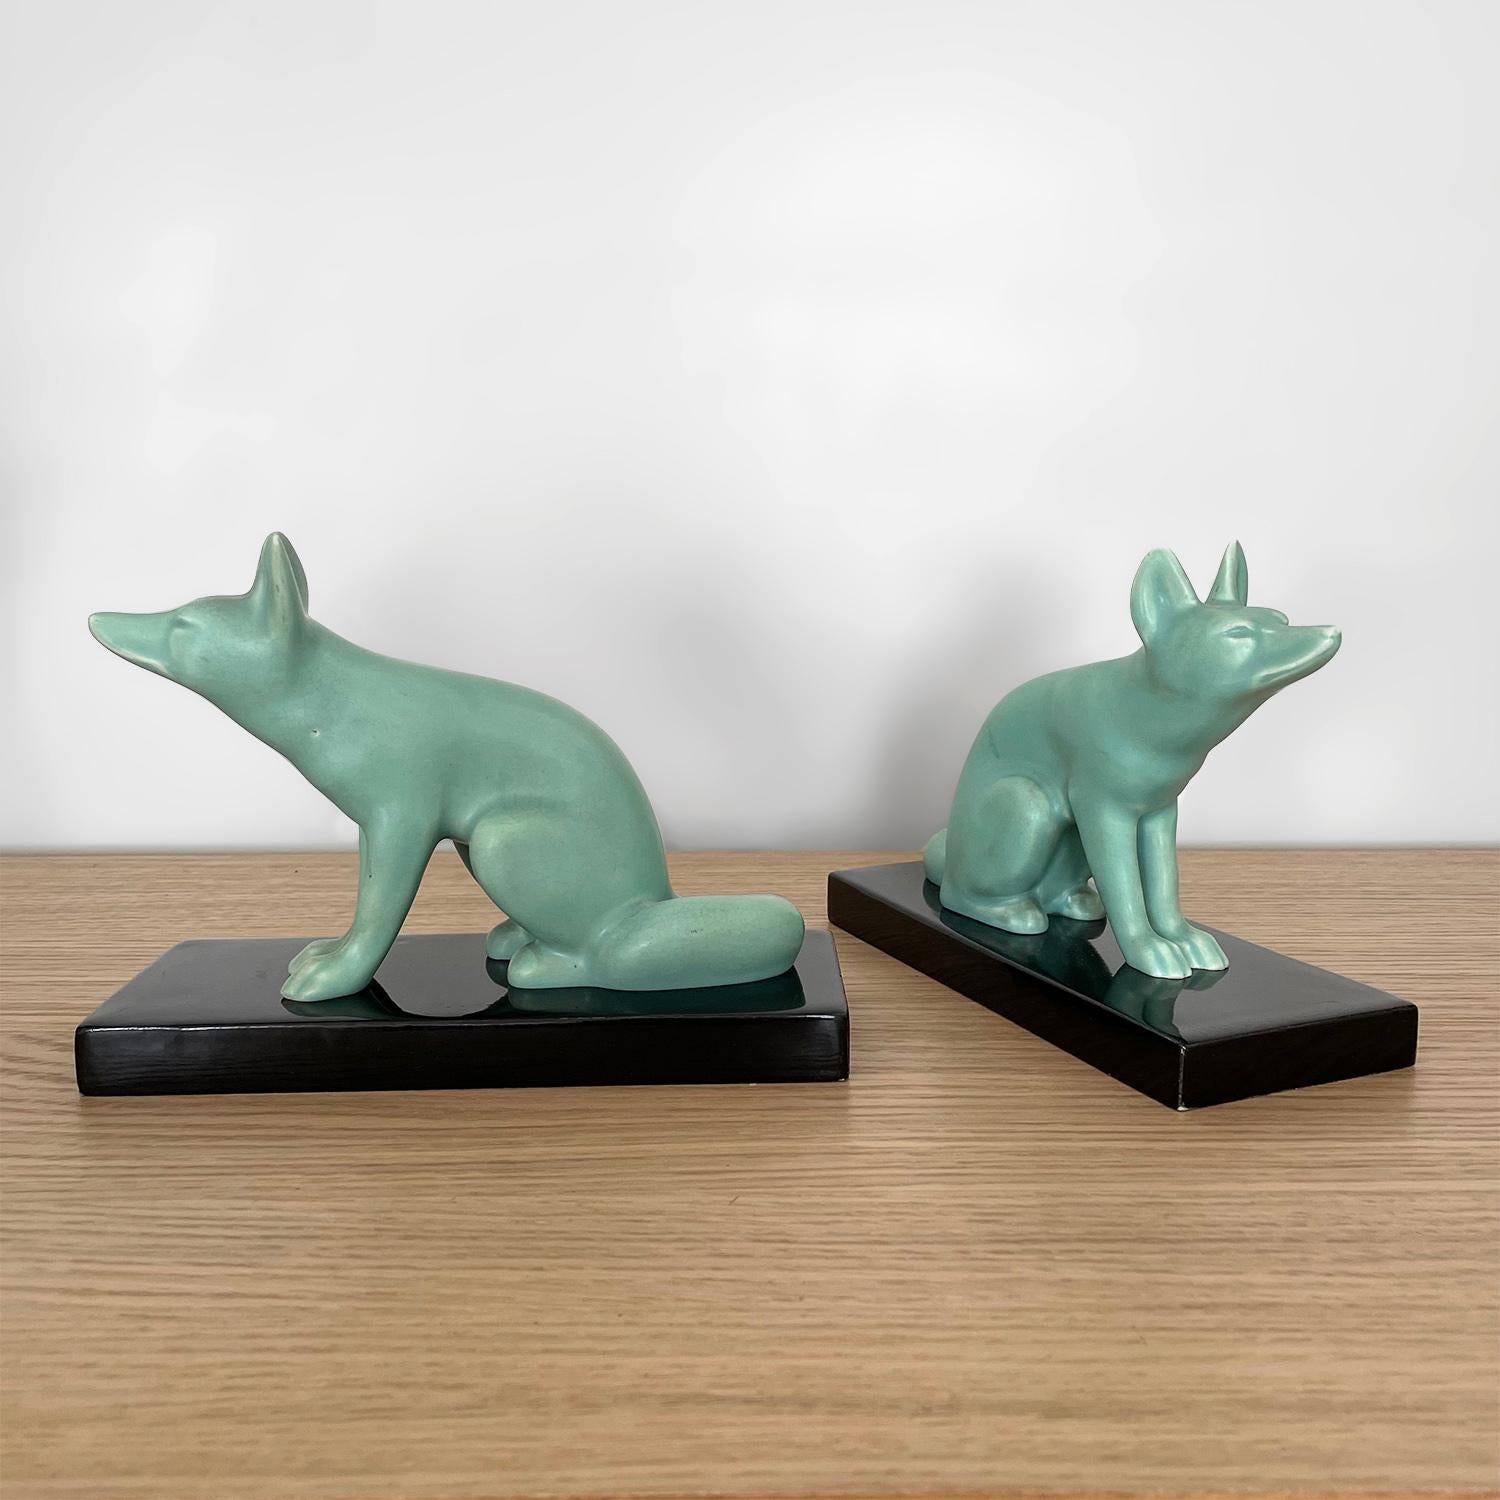 Pair of French Art Deco fox bookends
France, circa 1940’s
Matte finished celadon earthenware foxes
Glazed sandstone bases
Minor glazing imperfections (please reference photos)
Beautifully preserved
Patina from age and use
Priced and sold as a pair